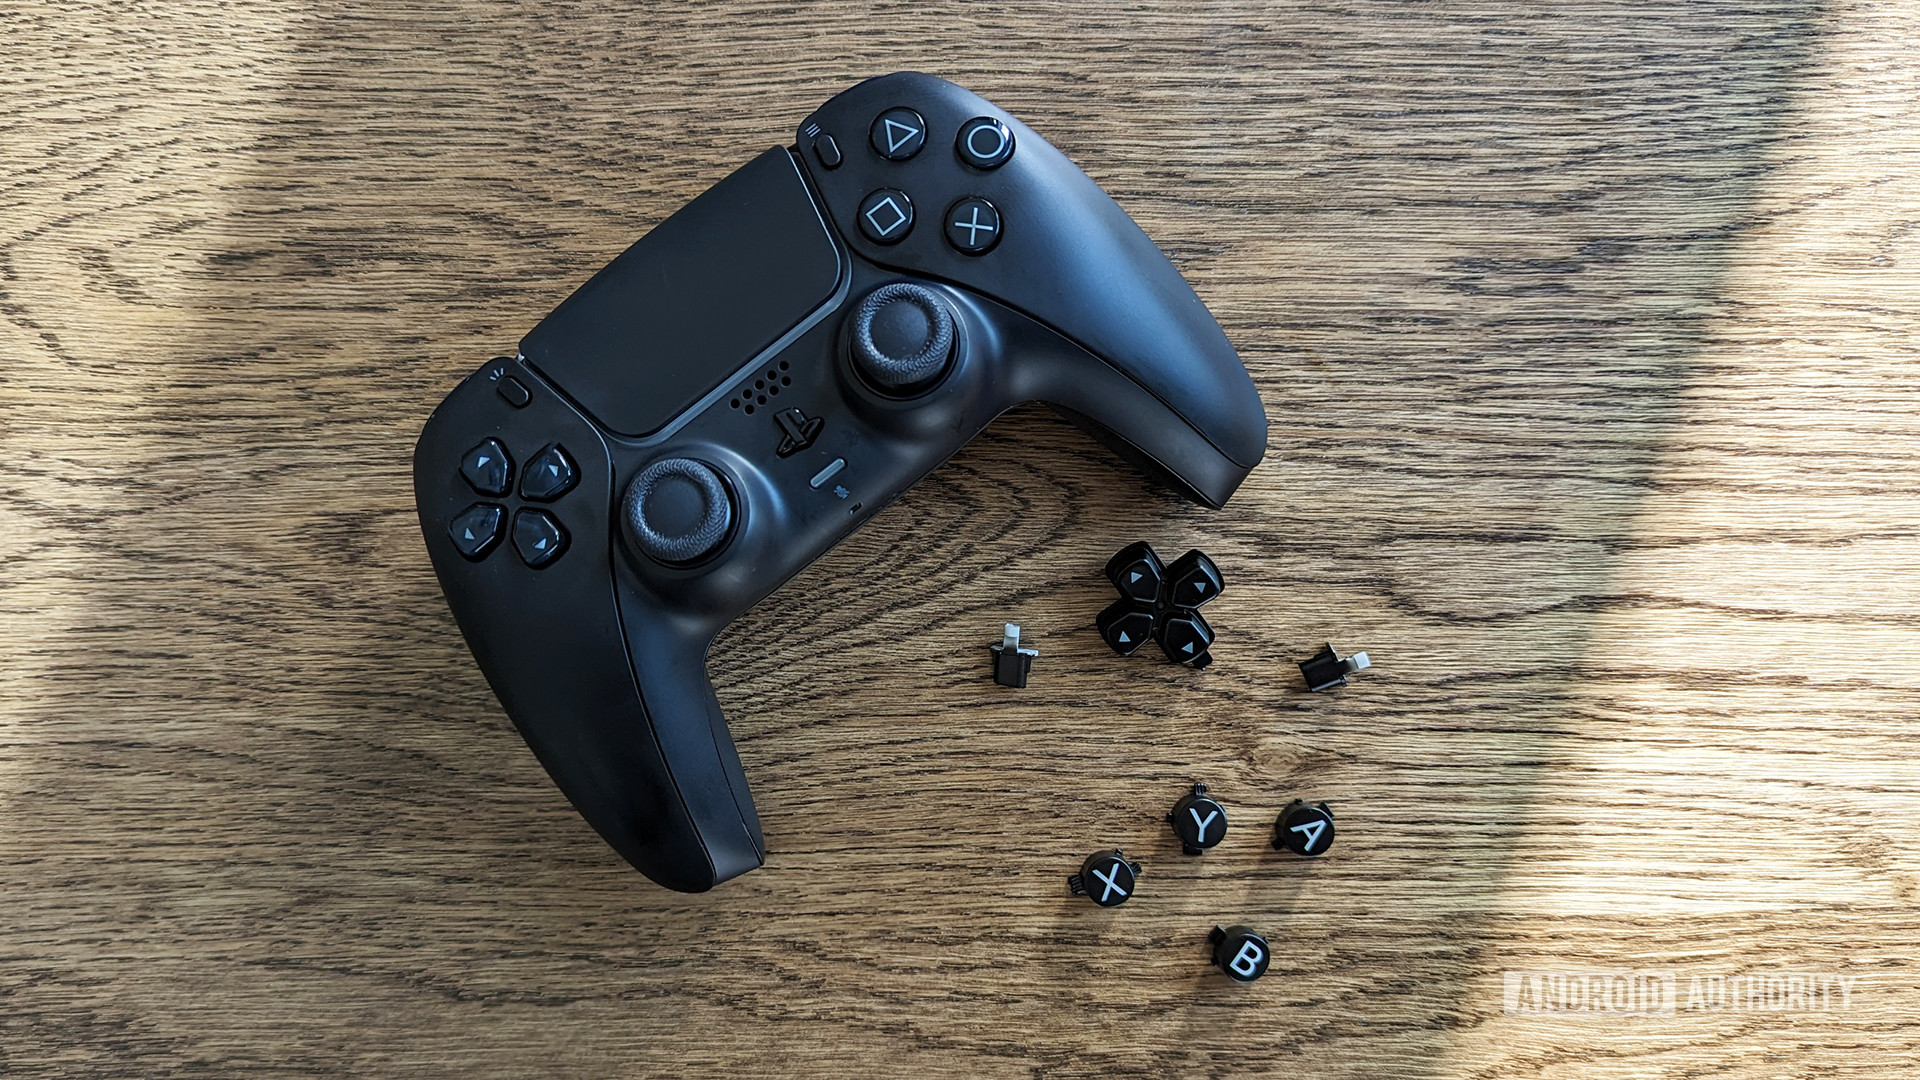 Customize your DualSense with the Xbox buttons